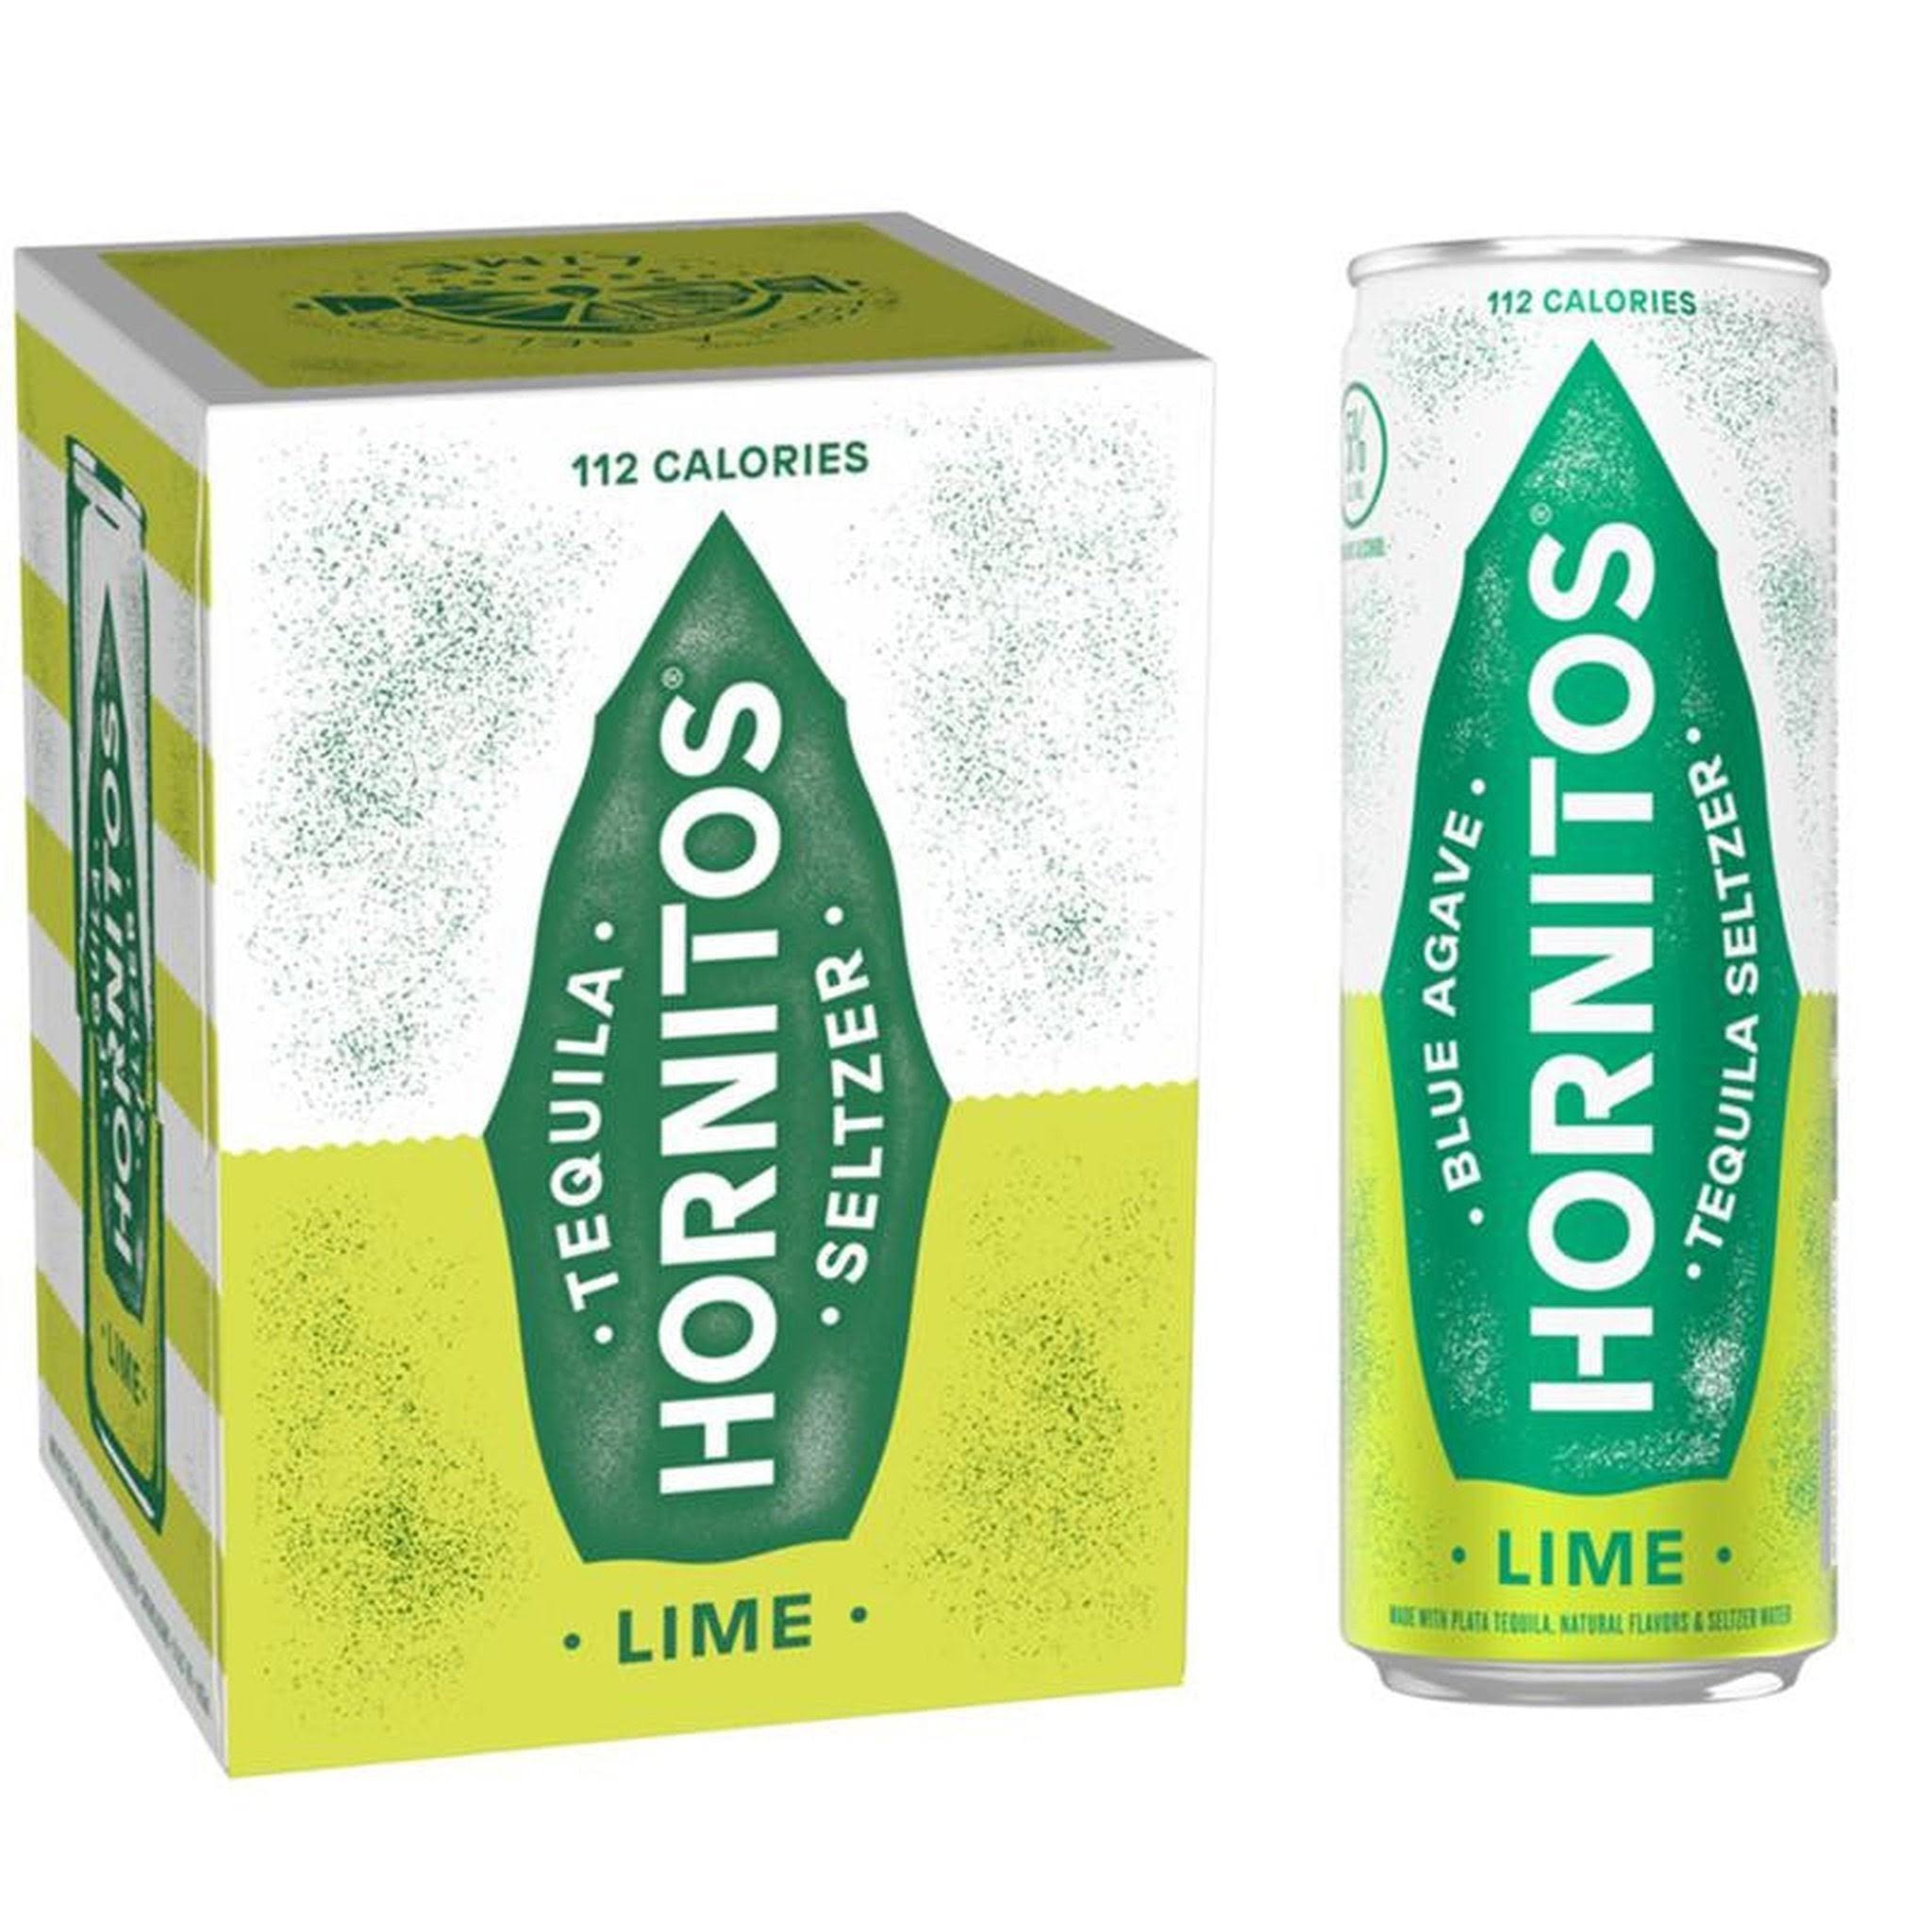 Hornitos Lime Tequila Seltzer